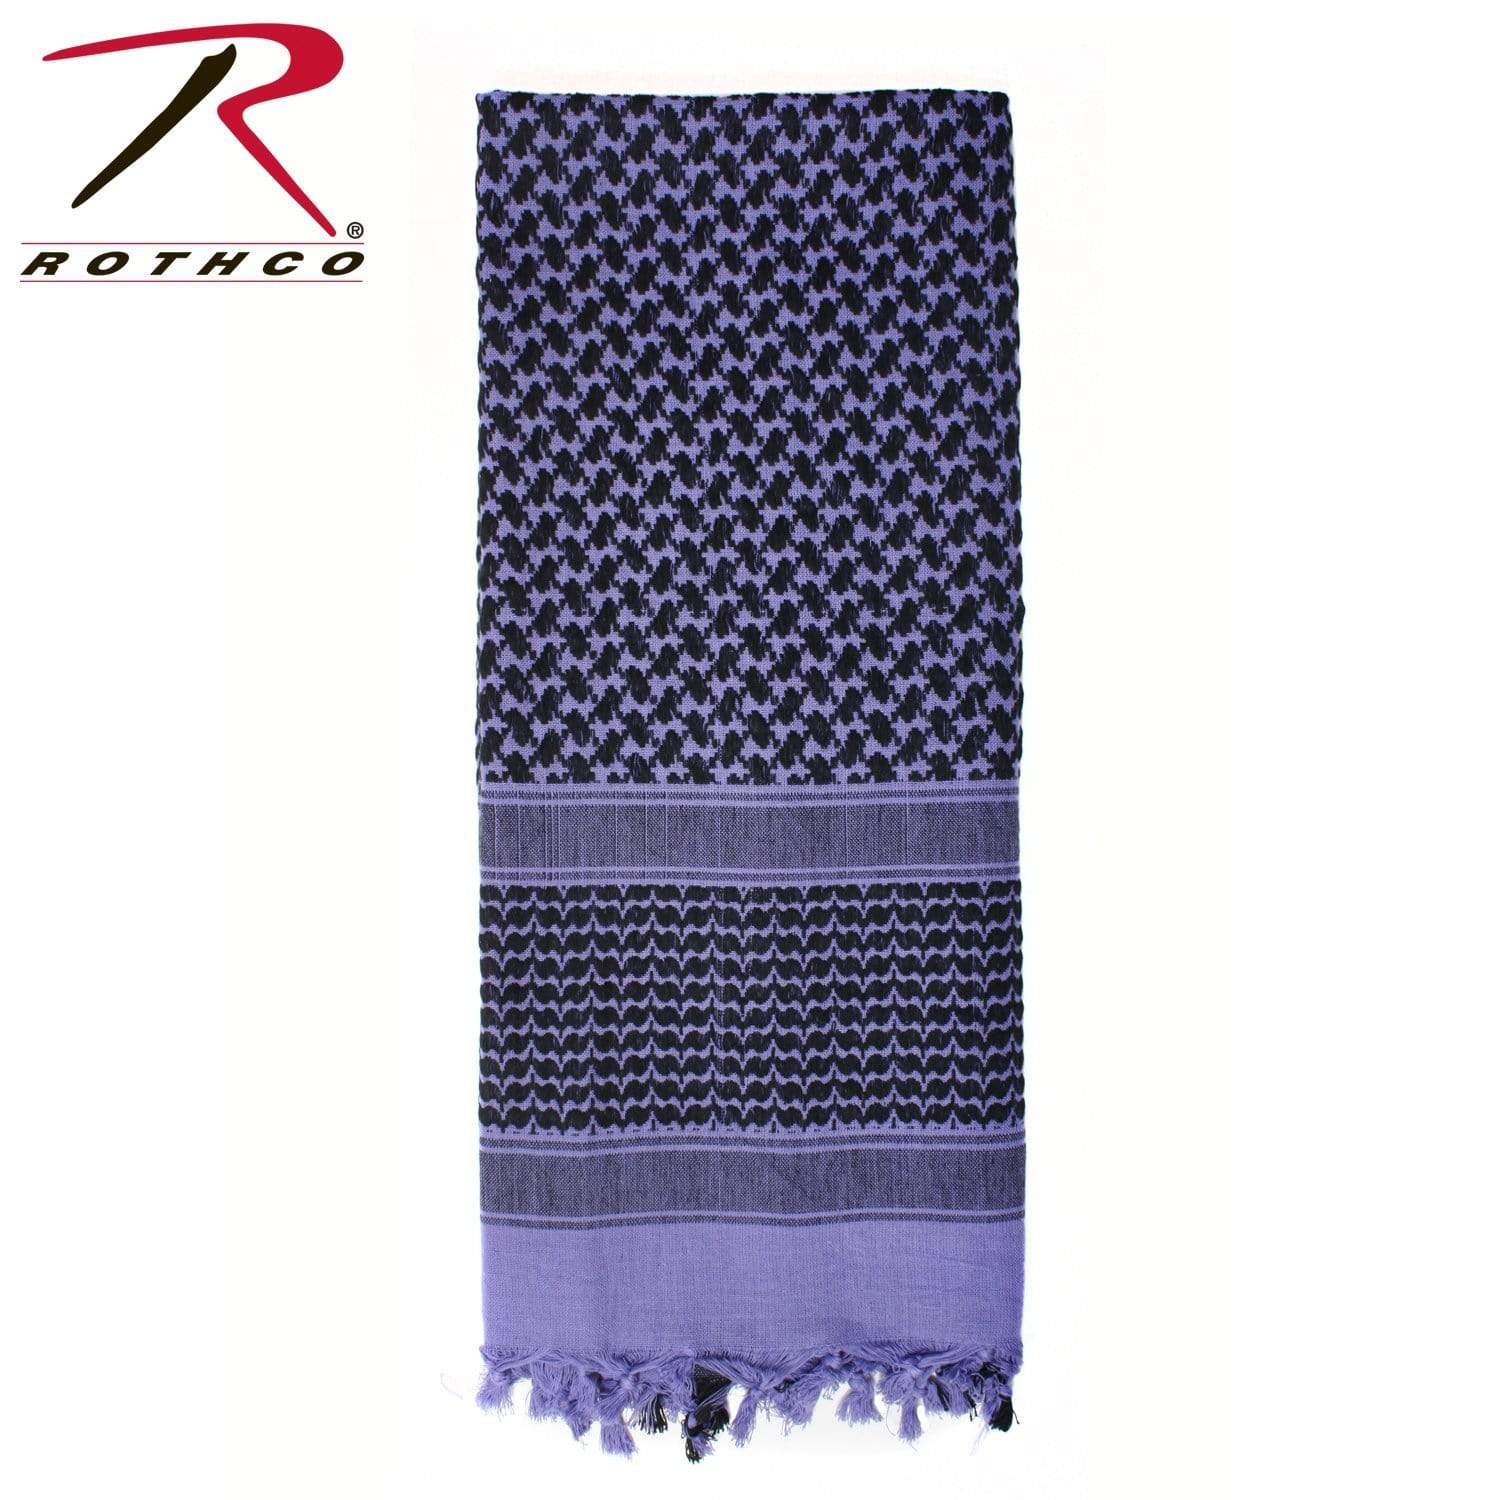 Rothco Shemagh Tactical Desert Keffiyeh Scarf - Purple - Eminent Paintball And Airsoft